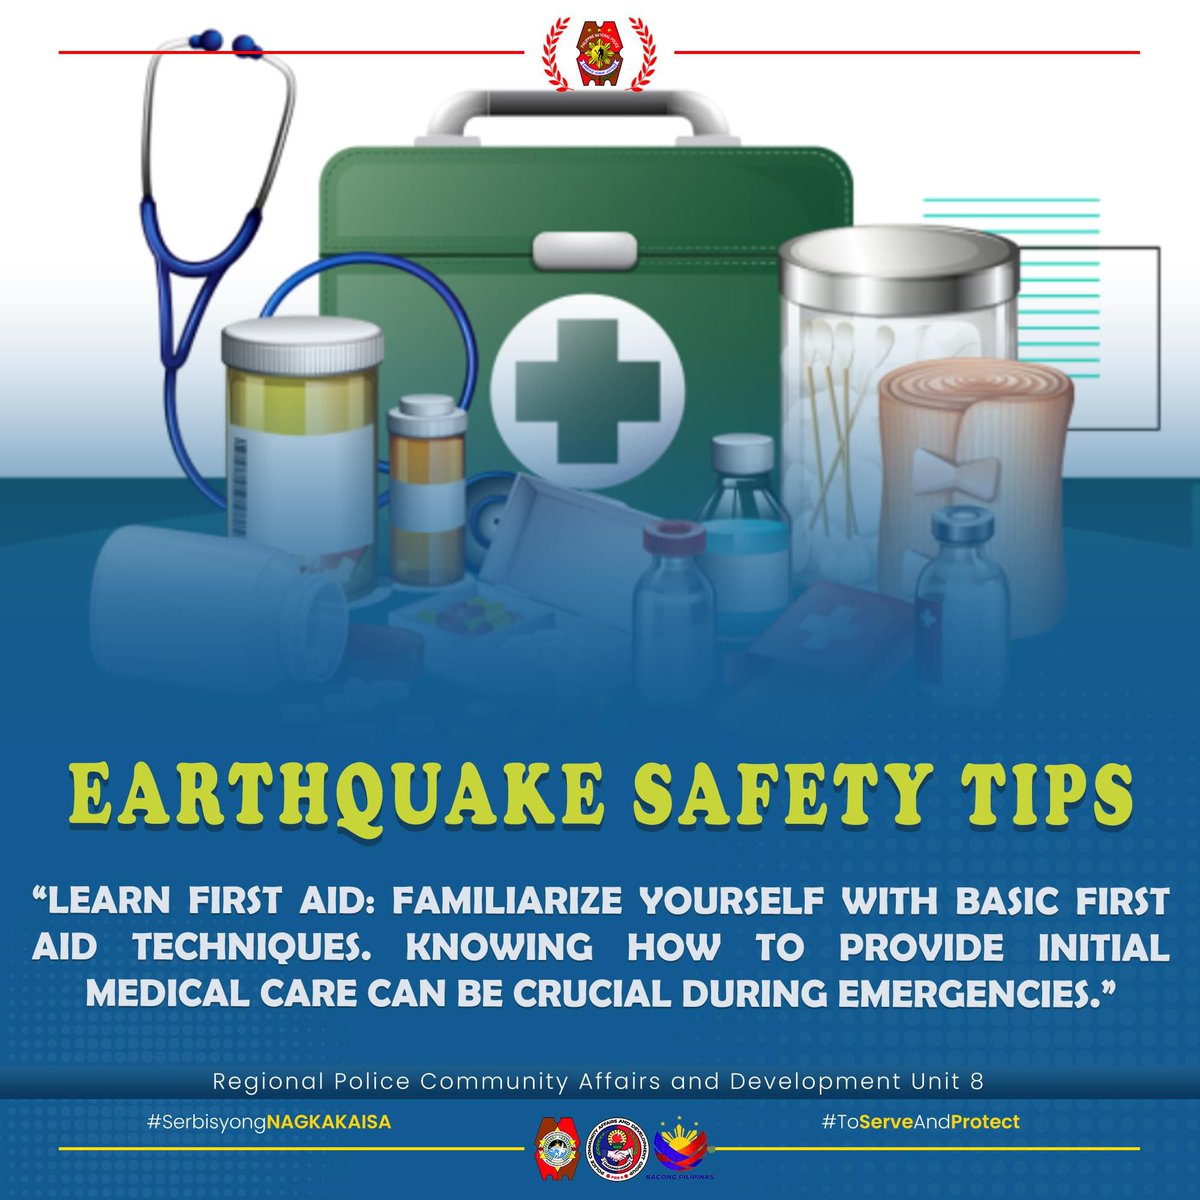 𝗘𝗔𝗥𝗧𝗤𝗨𝗔𝗞𝗘 𝗦𝗔𝗙𝗘𝗧𝗬 𝗧𝗜𝗣𝗦

'Learn First Aid: Familiarize yourself with basic first aid techniques. Knowing how to provide initial medical care can be crucial during emergencies.'

#BagongPilipinas 
#ToServeandProtect 
#pcadgeastenvisayas